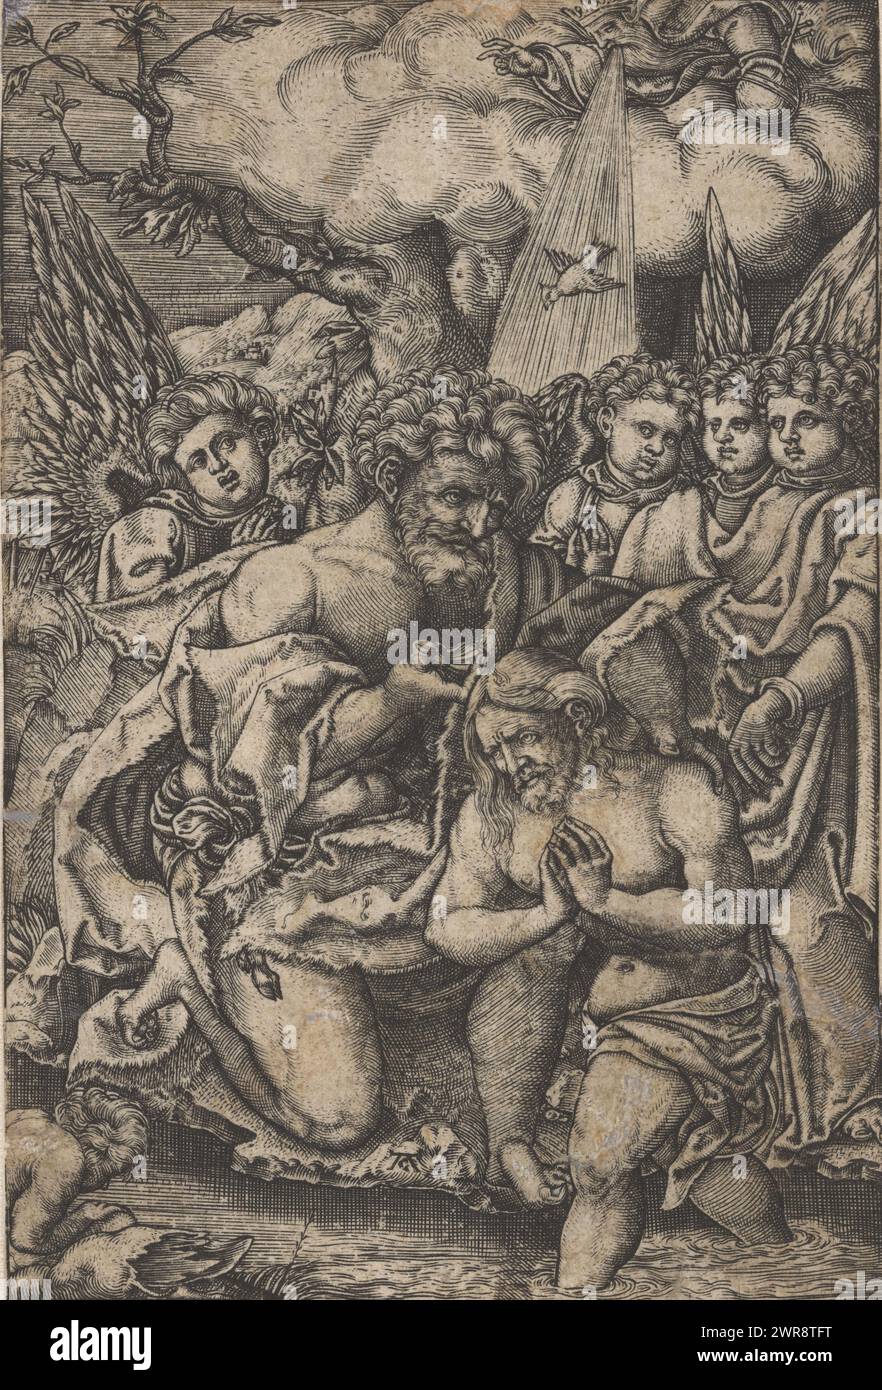 Baptism of Christ, Christ, standing in the Jordan River, is baptized by John the Baptist and watched by Angels. God the Father, with an orb in his hand, lets the Holy Spirit descend on Christ in the form of a dove., print maker: Monogrammist AC (16e eeuw), print maker: Allaert Claesz., c. 1520 - c. 1555, paper, engraving, height 100 mm × width 67 mm, print Stock Photo